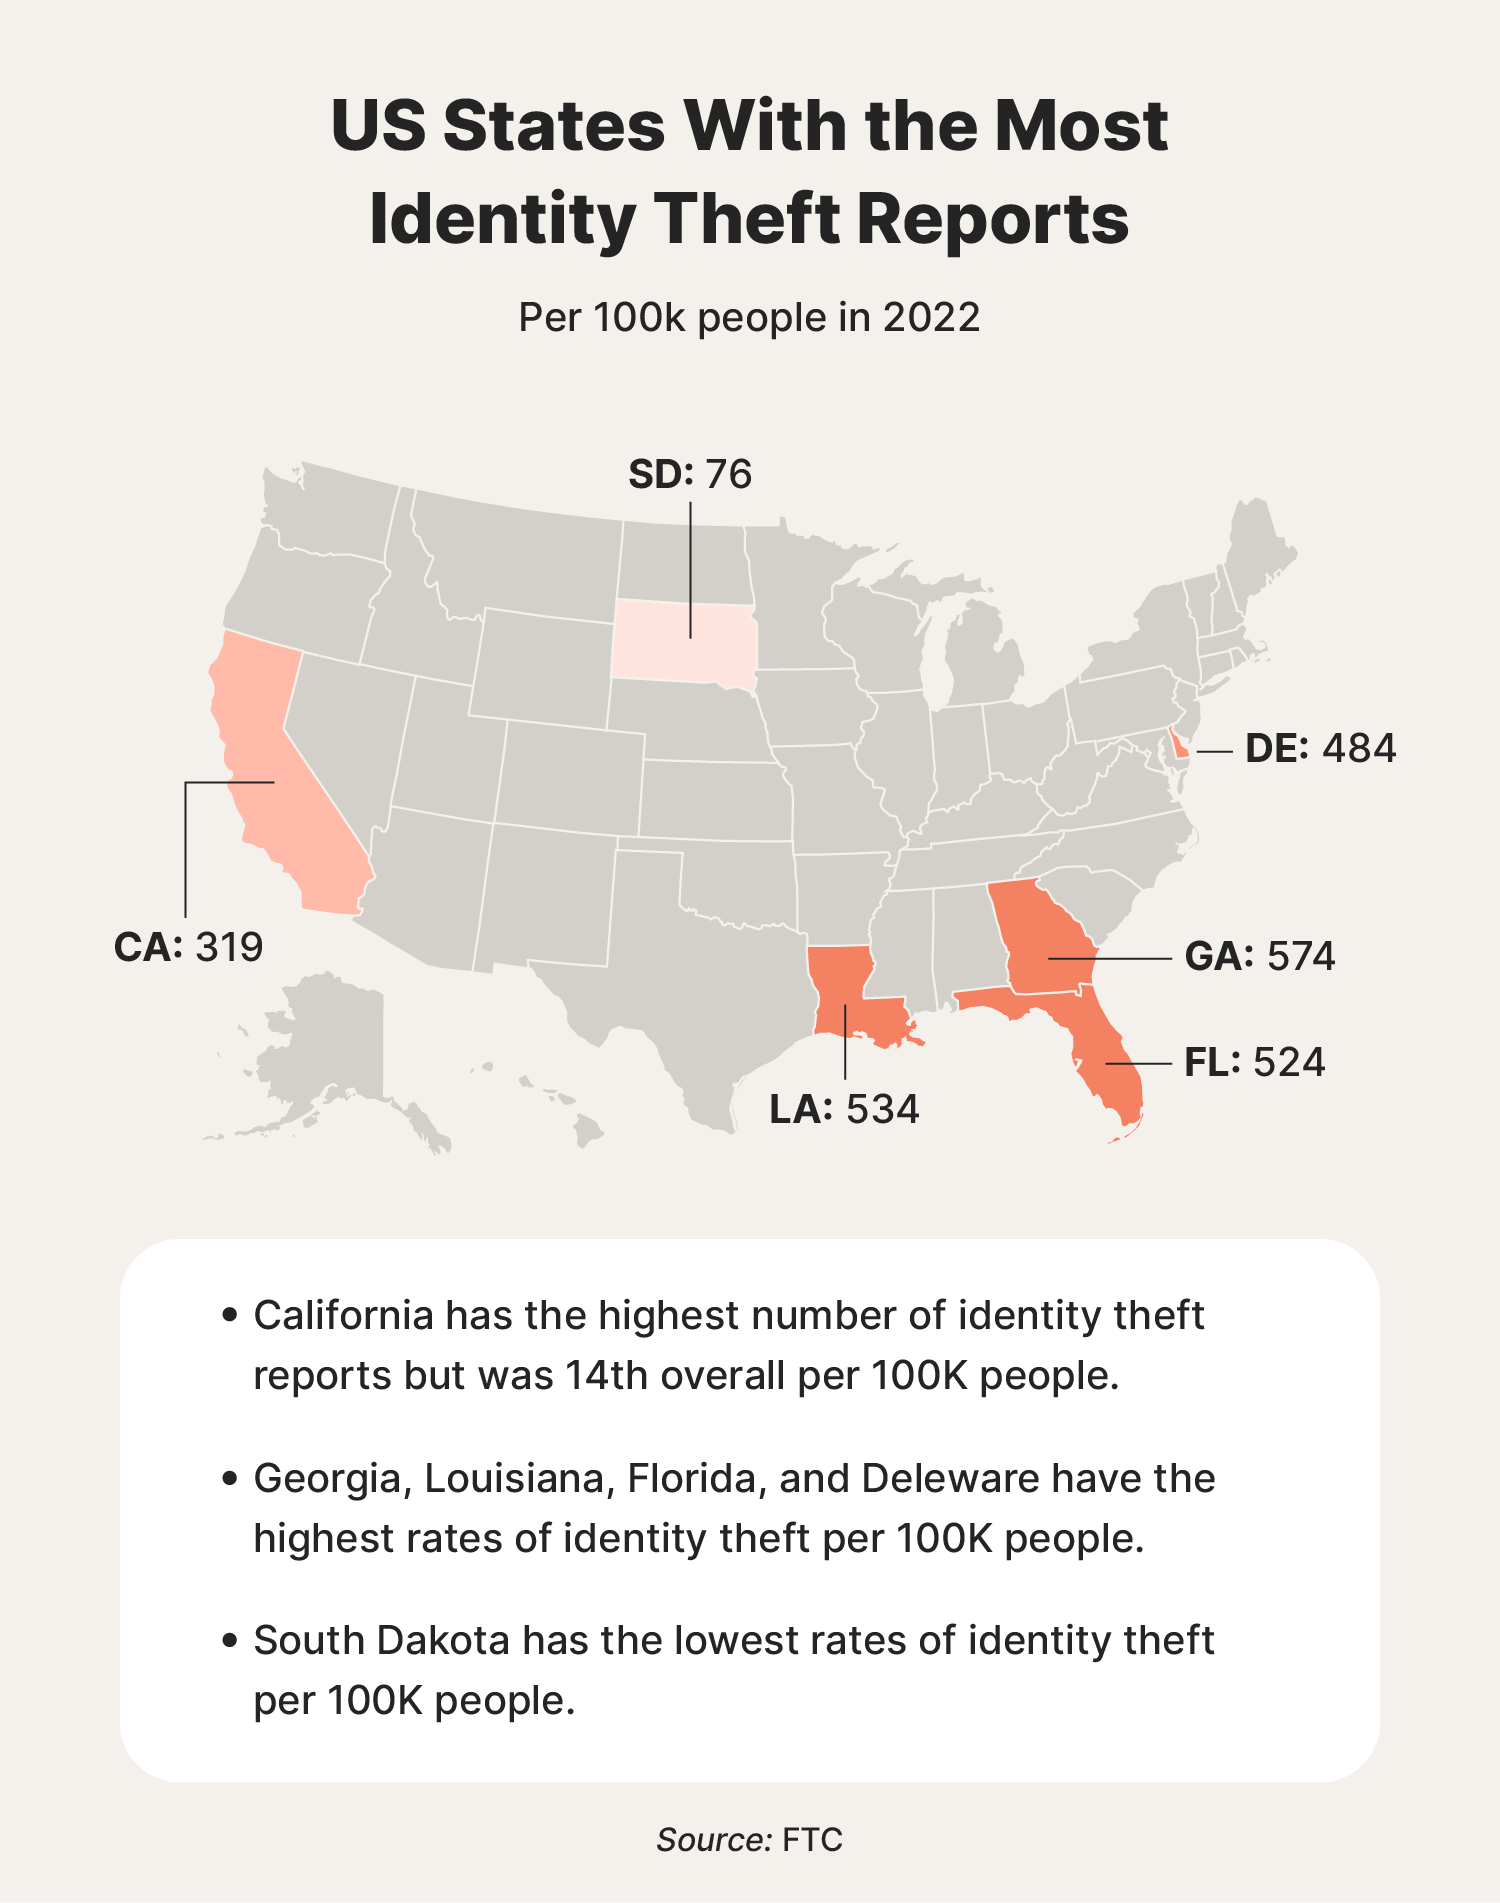 A map showing the U.S. states with most identity theft to show how common identity theft is.